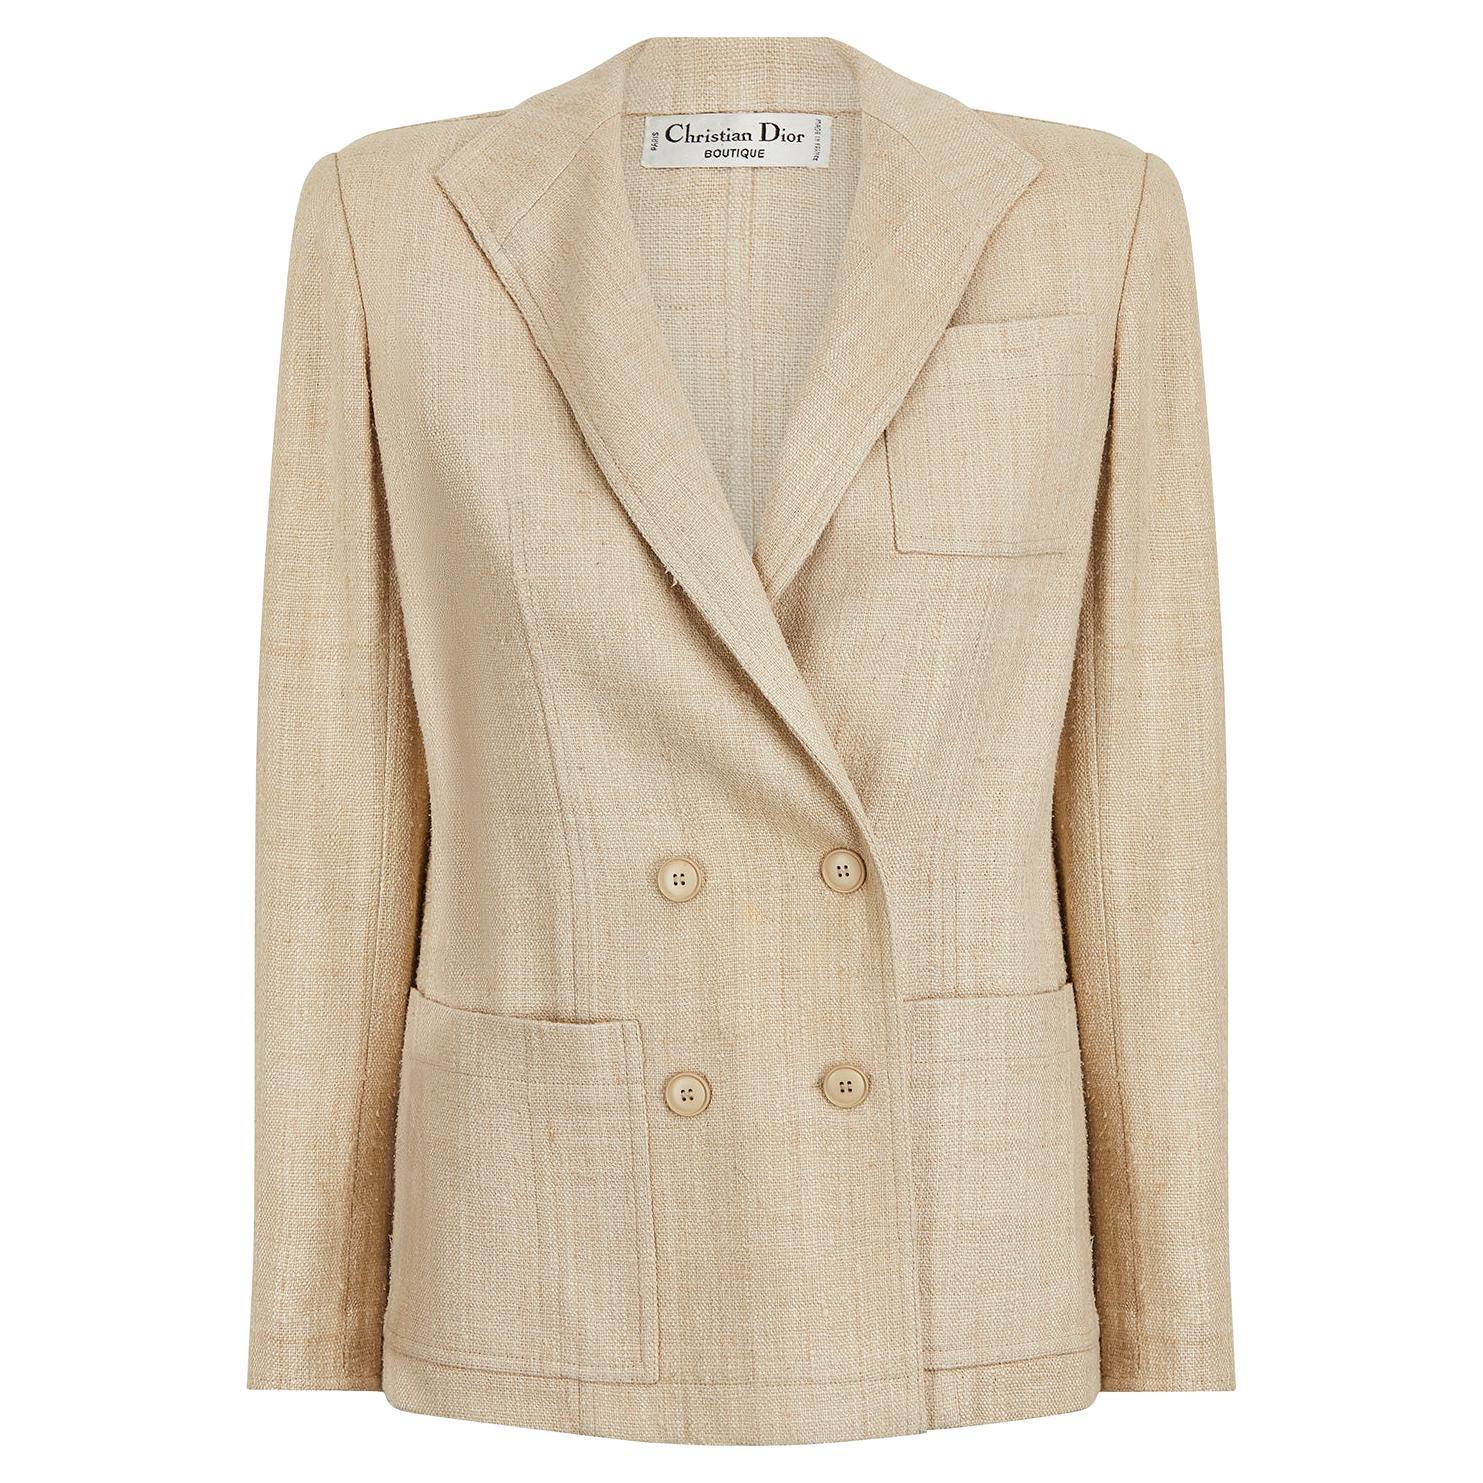 1980s Christian Dior Oatmeal Linen Double Breasted Jacket